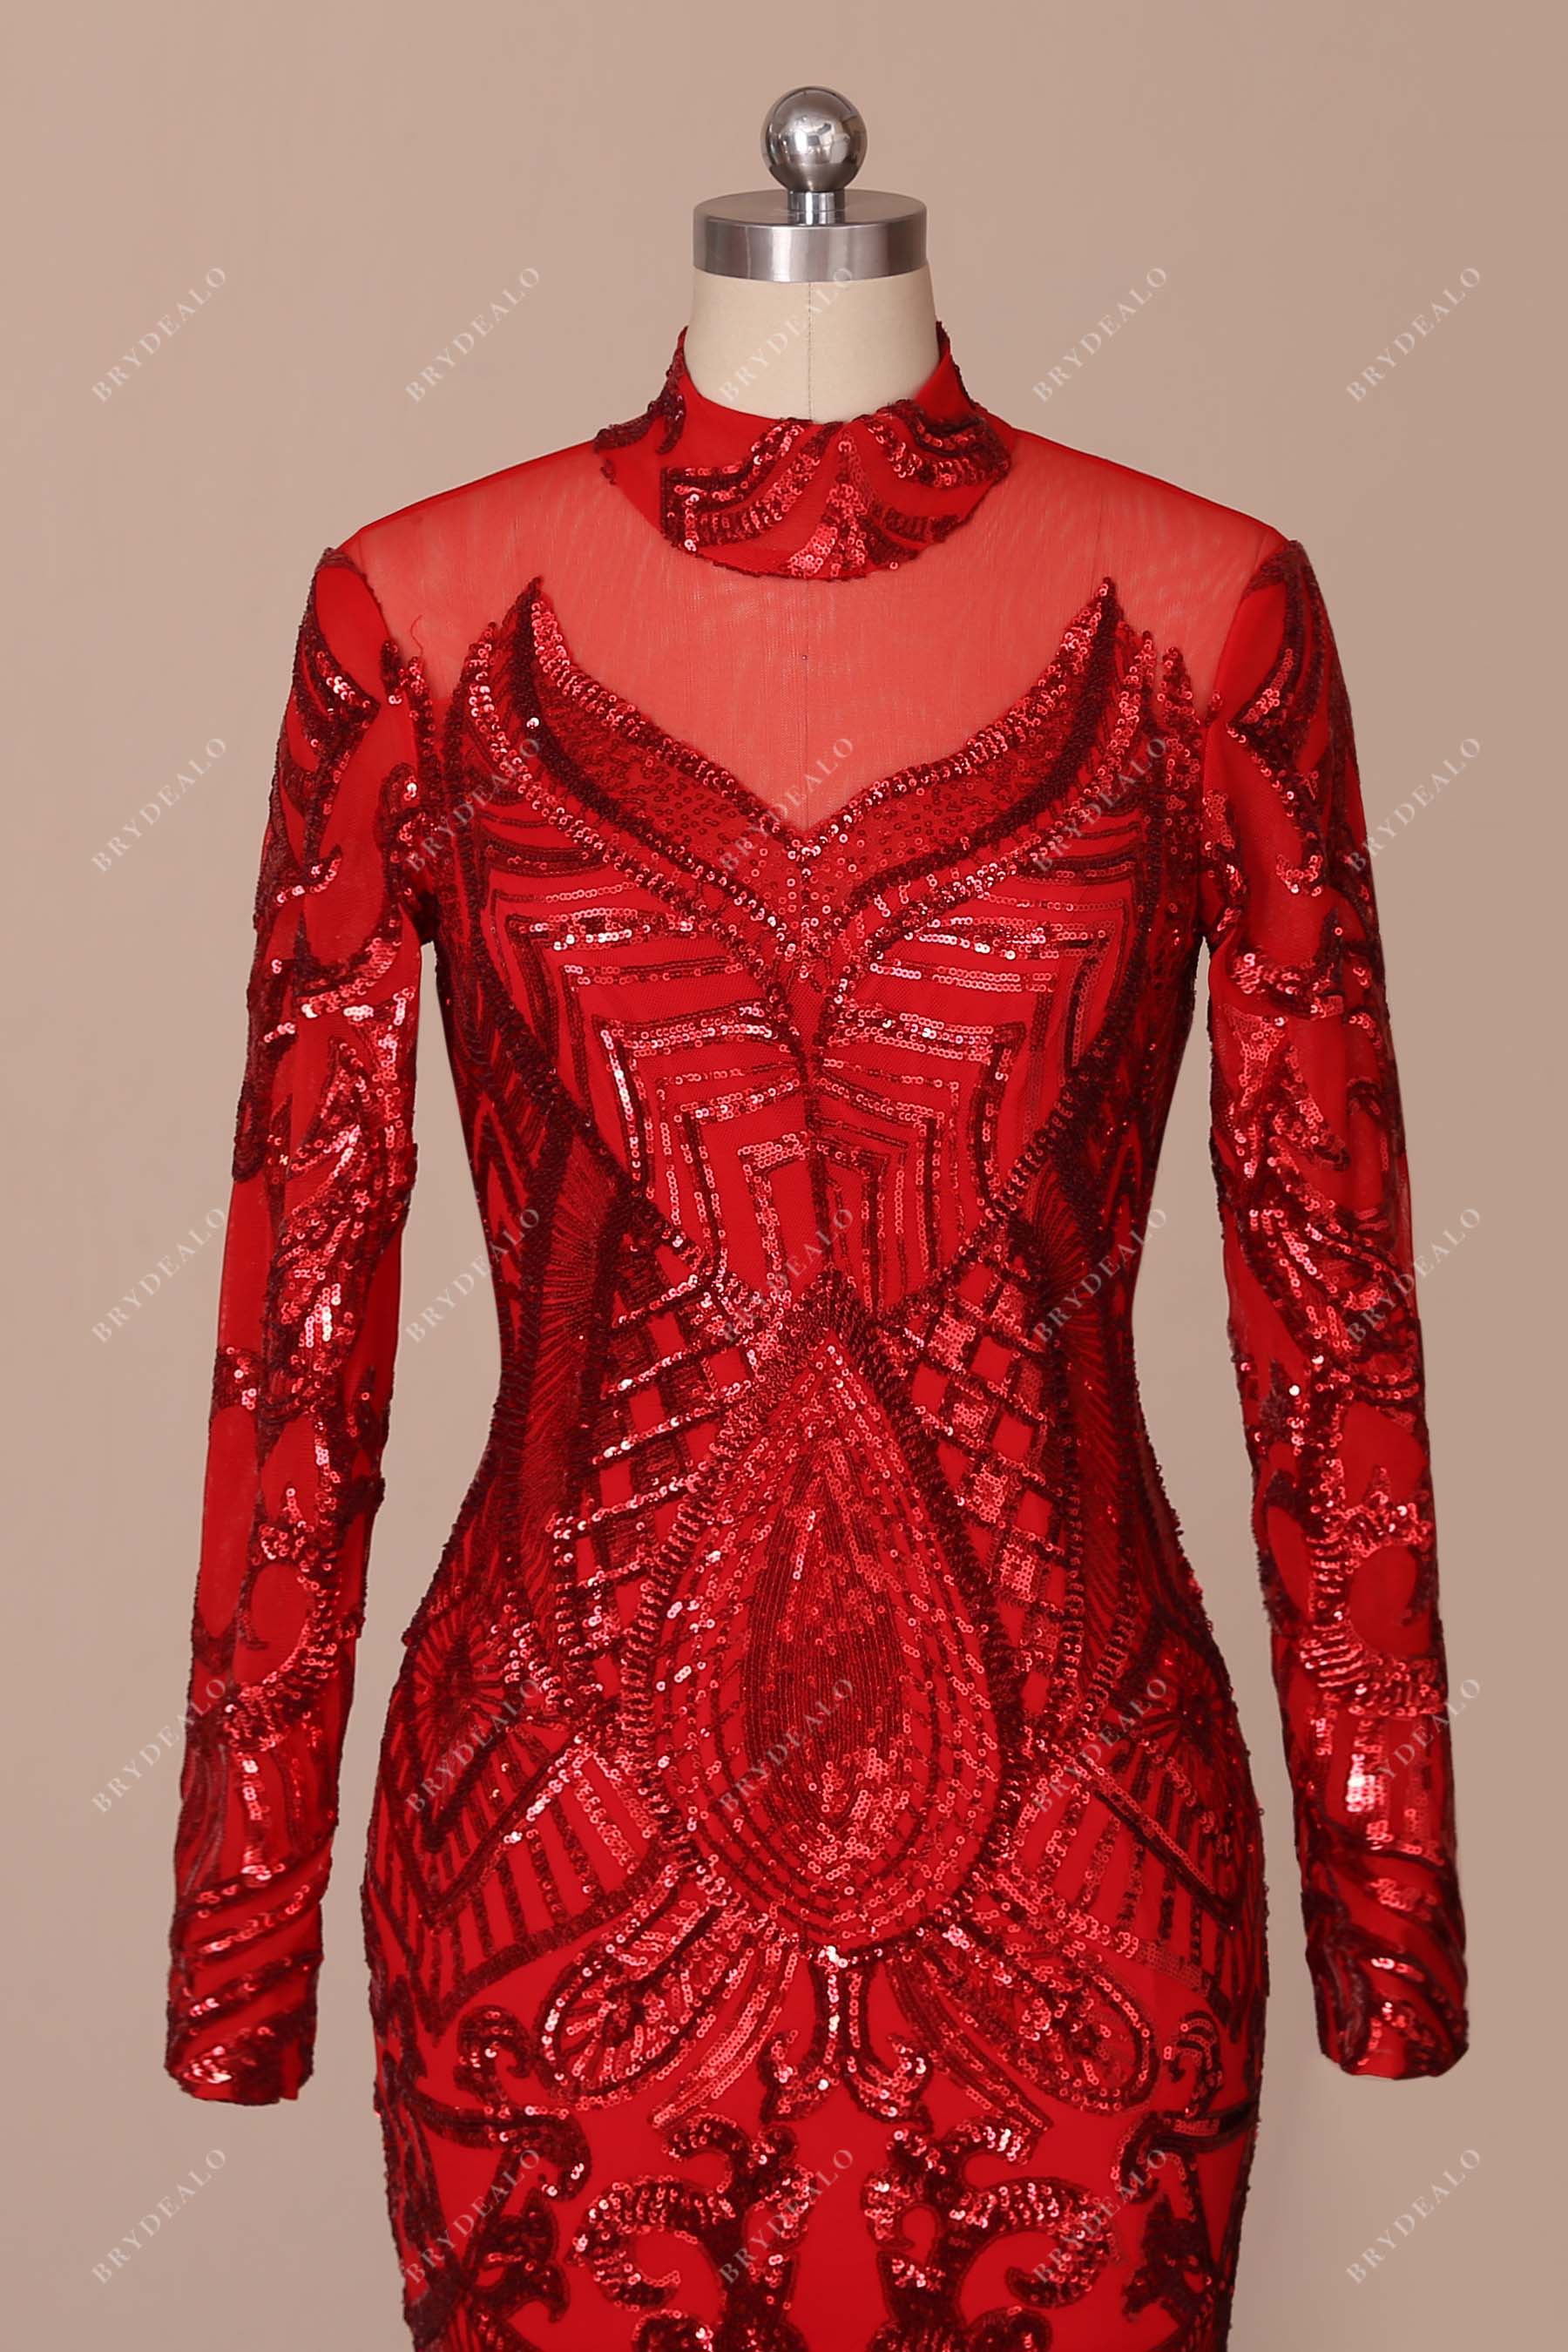 sequin high neck red sleeved prom dress